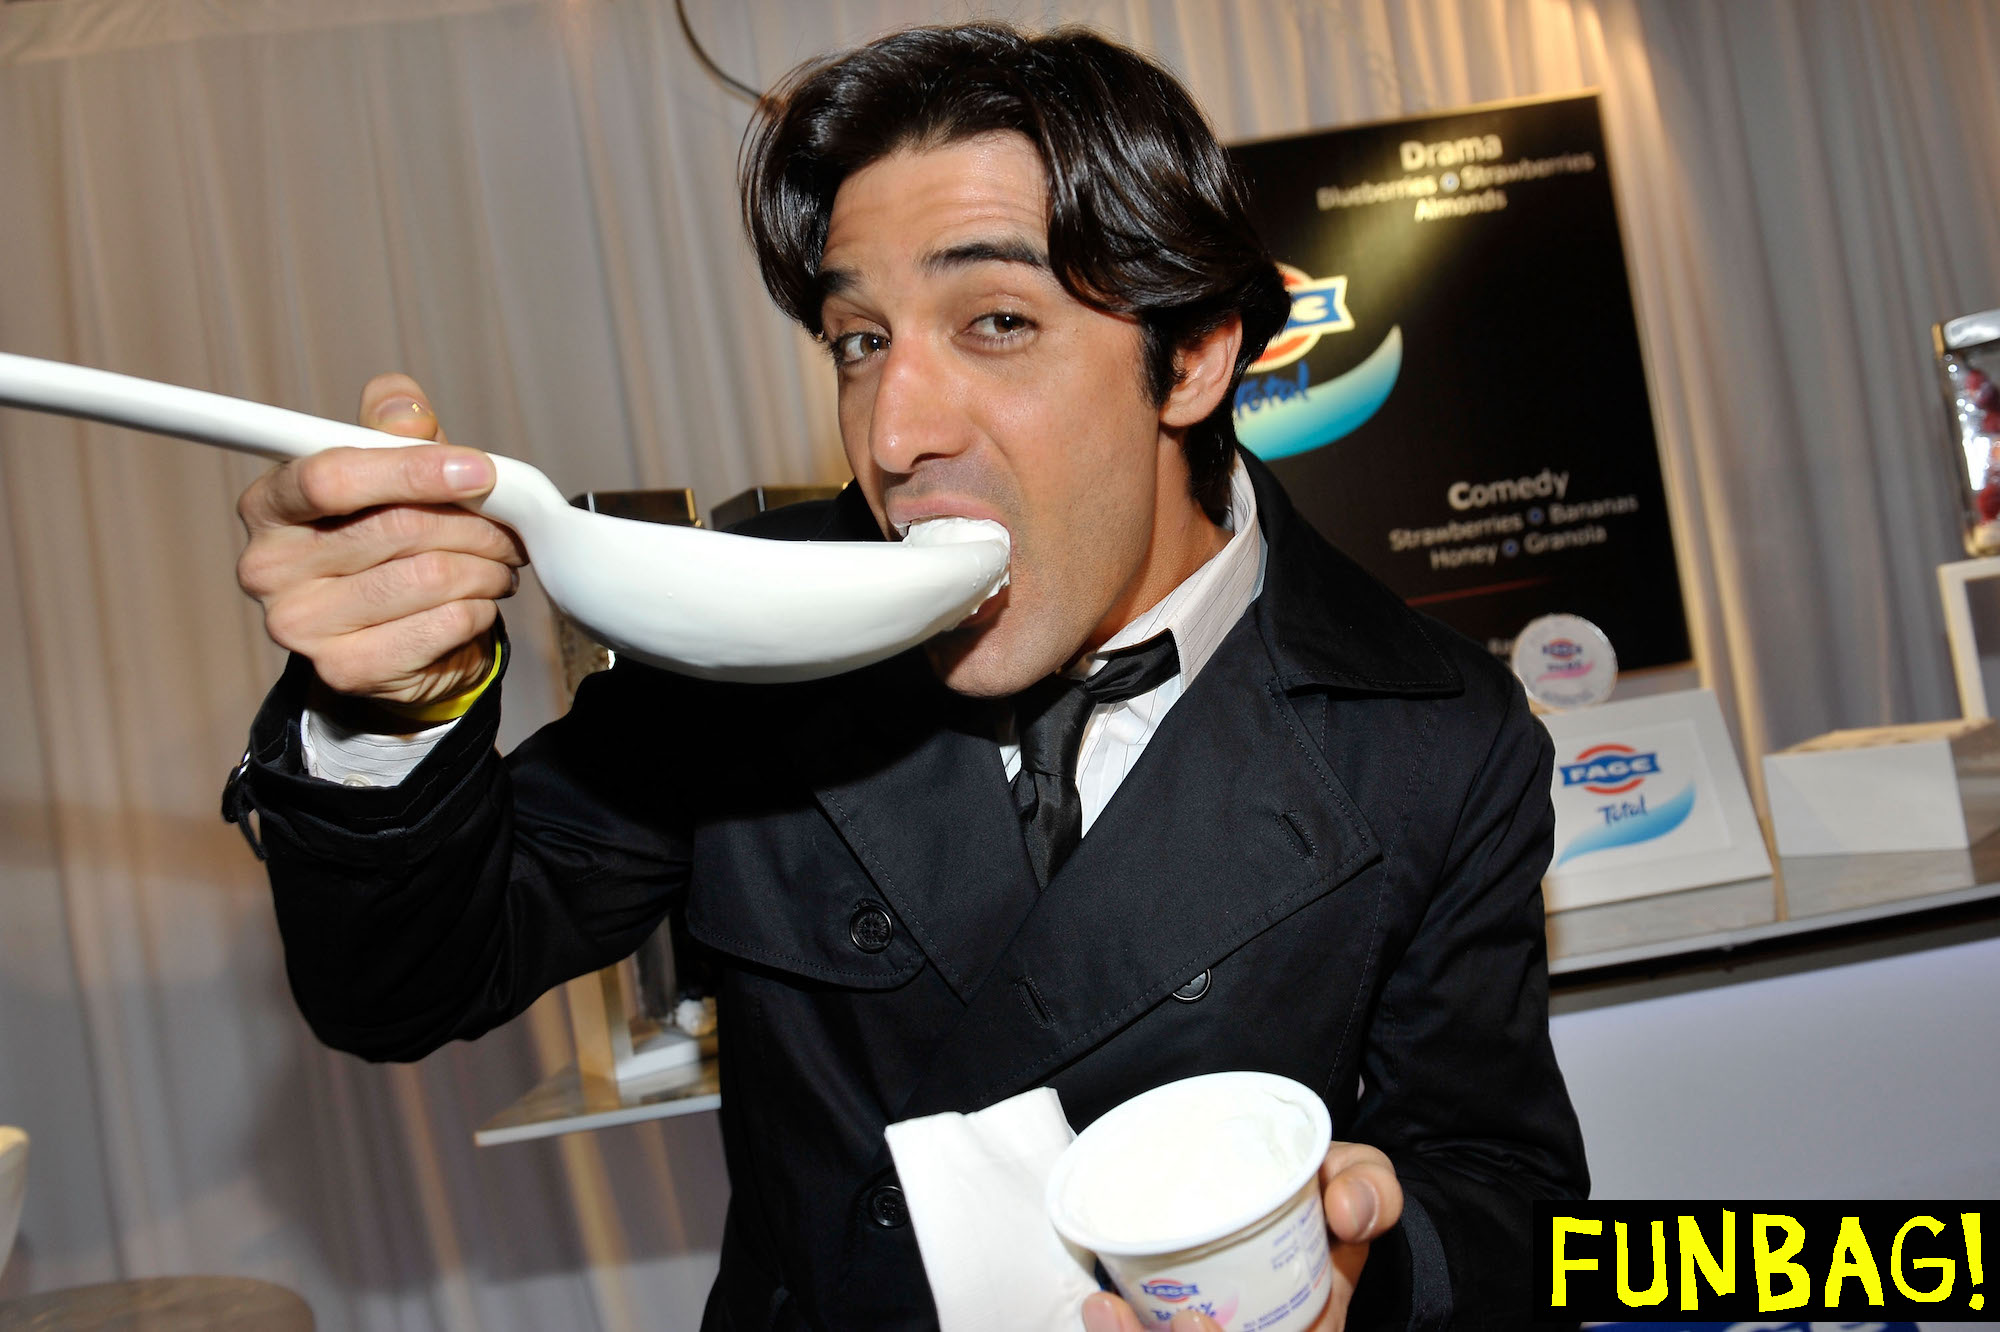 (EXCLUSIVE, Premium Rates Apply) LOS ANGELES, CA - MARCH 05: **EXCLUSIVE COVERAGE** Actor Gilles Marini attends the FAGE Total Yogurt Bar at The 25th Spirit Awards Official Presenter Lounge held at Nokia Theatre L.A. Live on March 5, 2010 in Los Angeles, California. (Photo by Charley Gallay/WireImage)